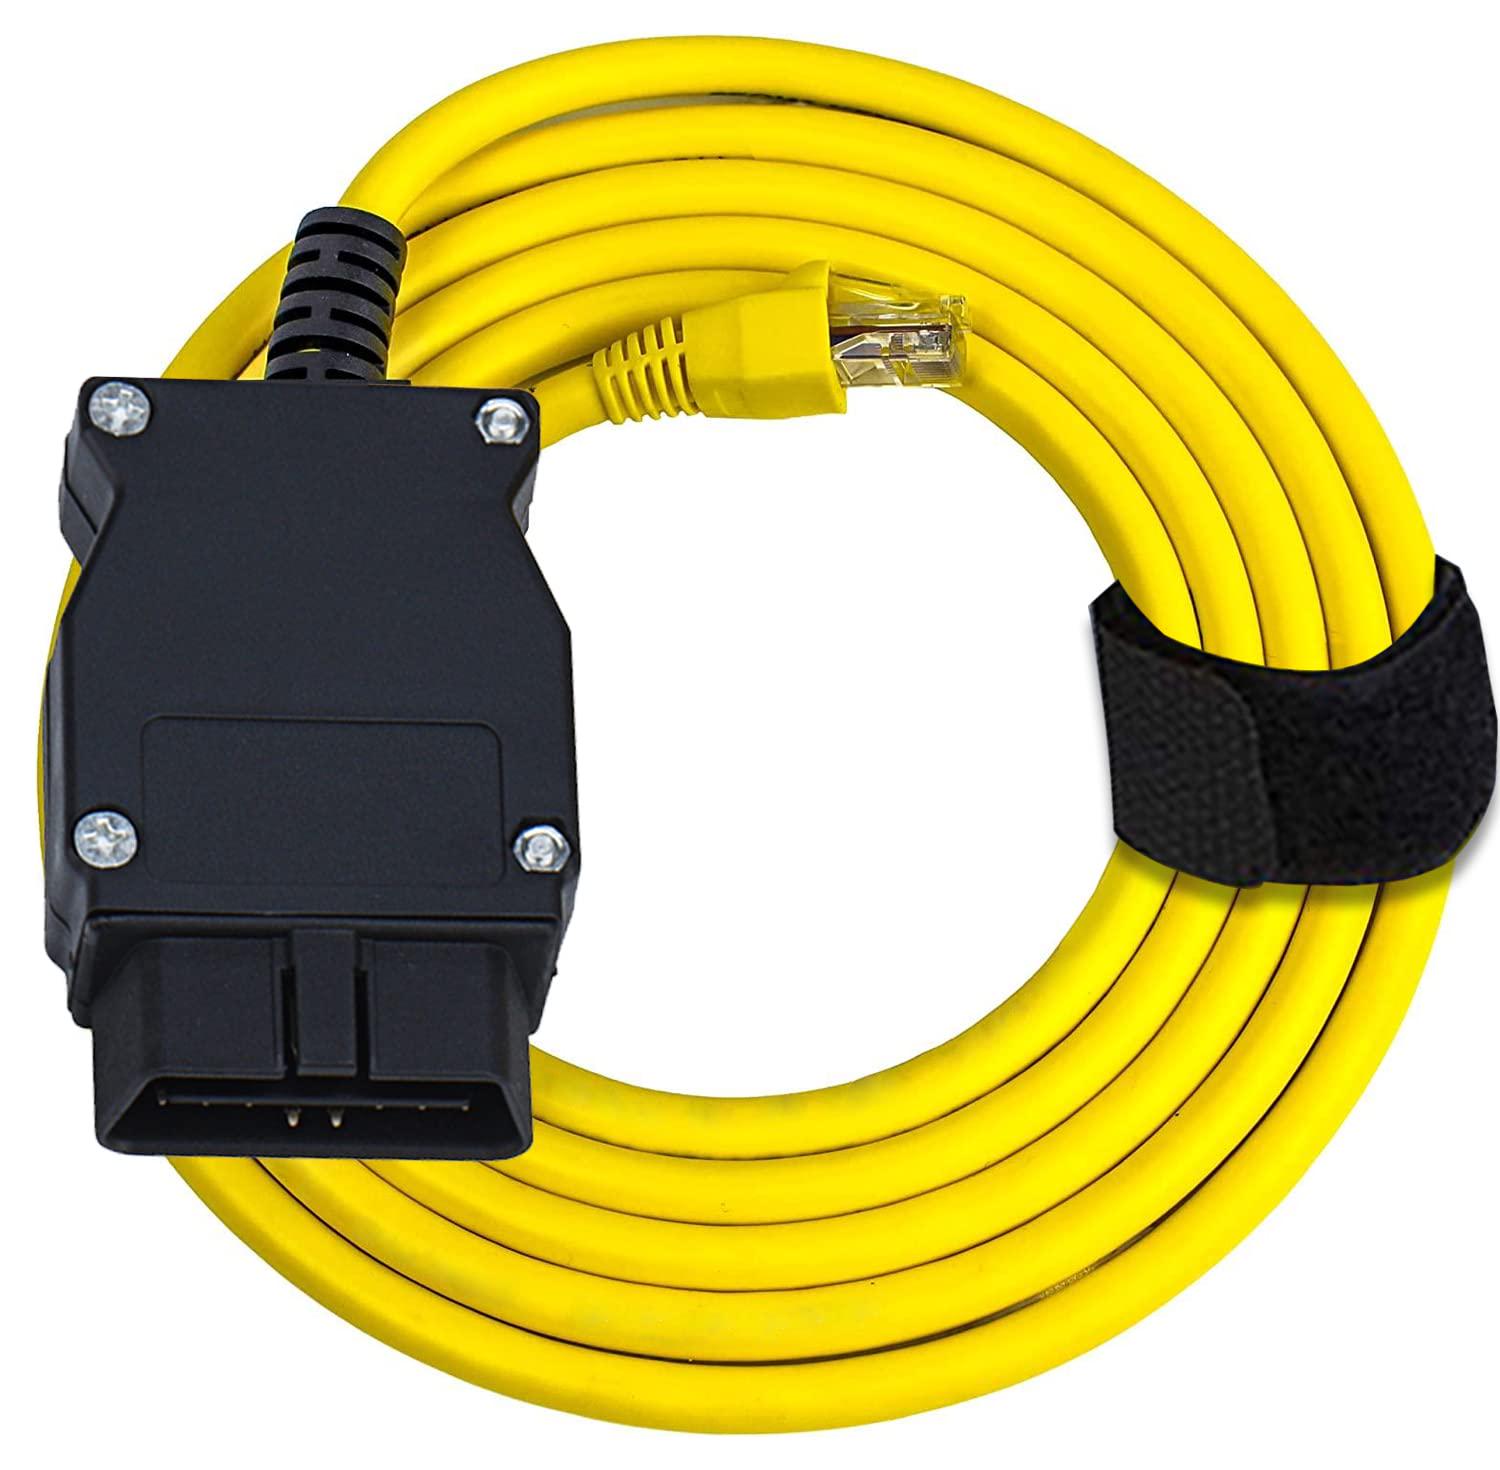 BMW ENET (Ethernet to OBD) Interface Cable